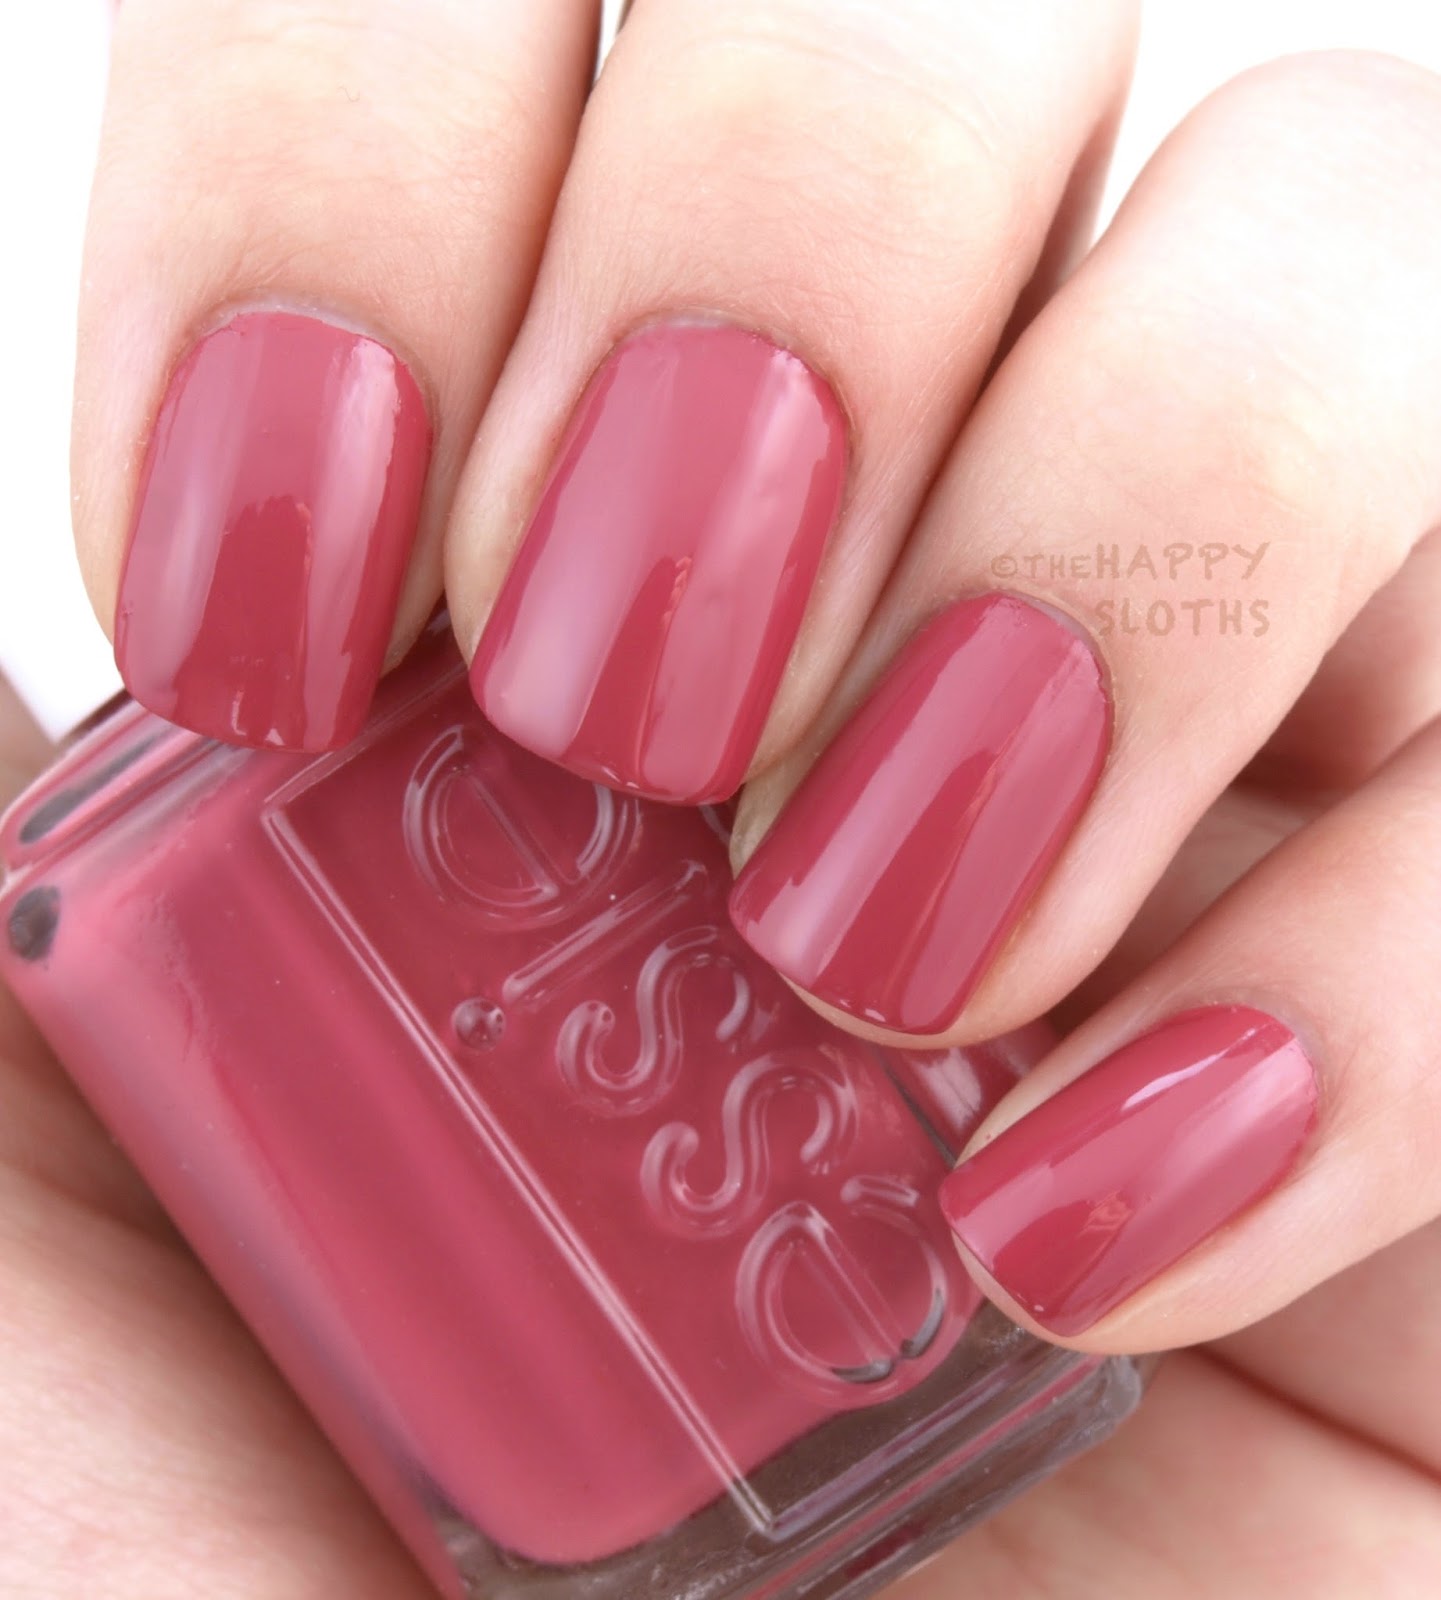 Essie Bridal 2016 Collection: Review and Swatches | The Happy Sloths ...